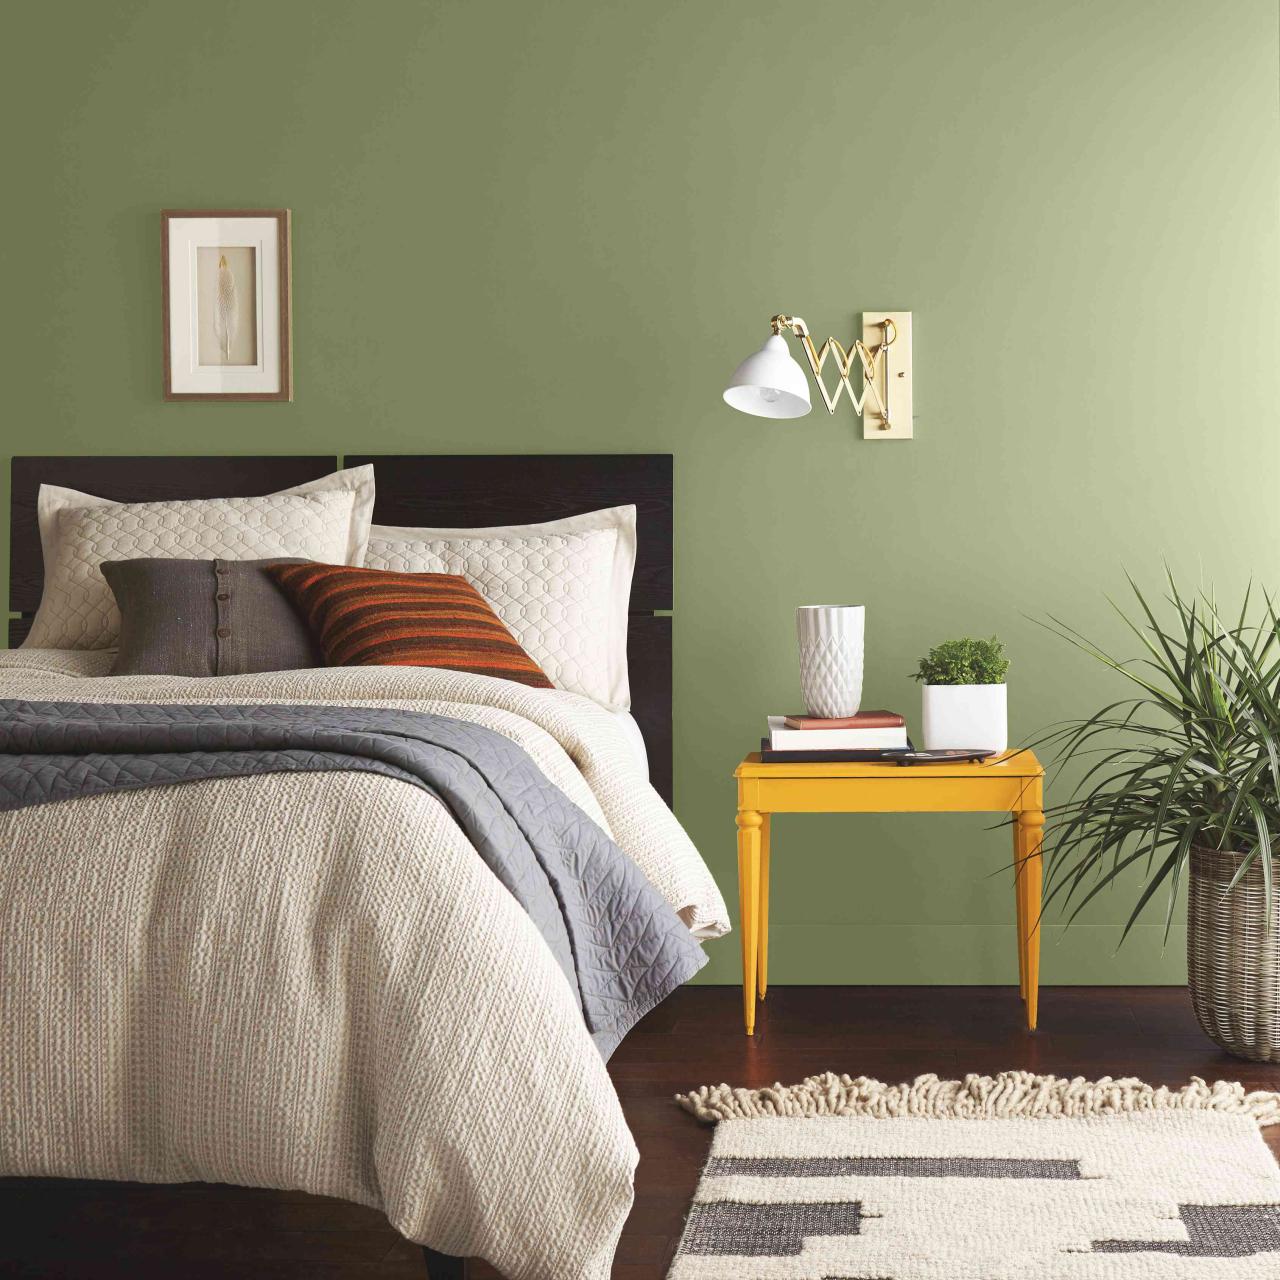 Transform Your Bedroom into a Serene Oasis